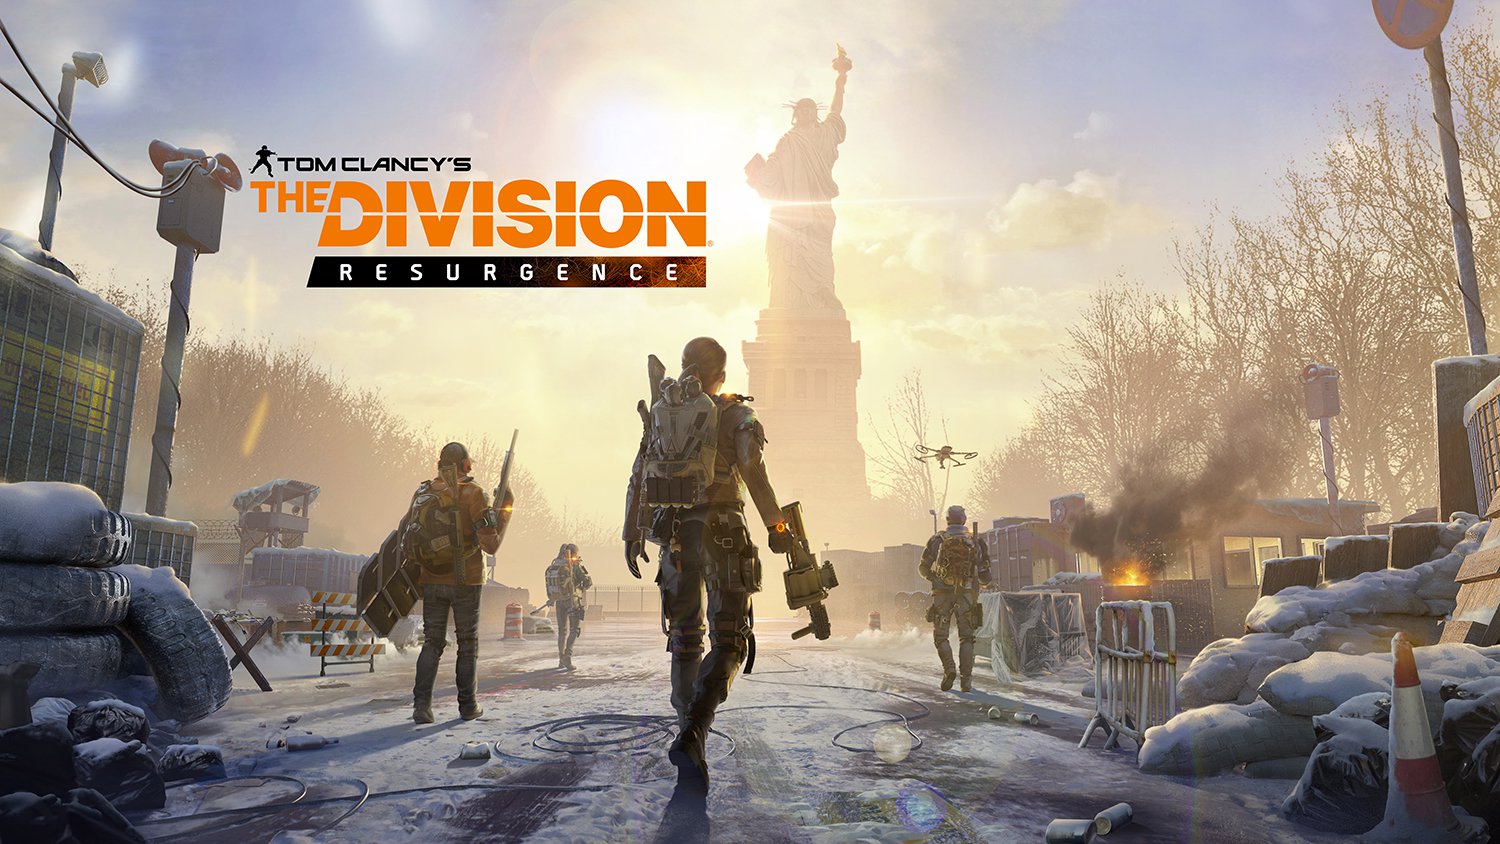 Tom Clancy's The Division Resurgence 18"x28" (45cm/70cm) Poster